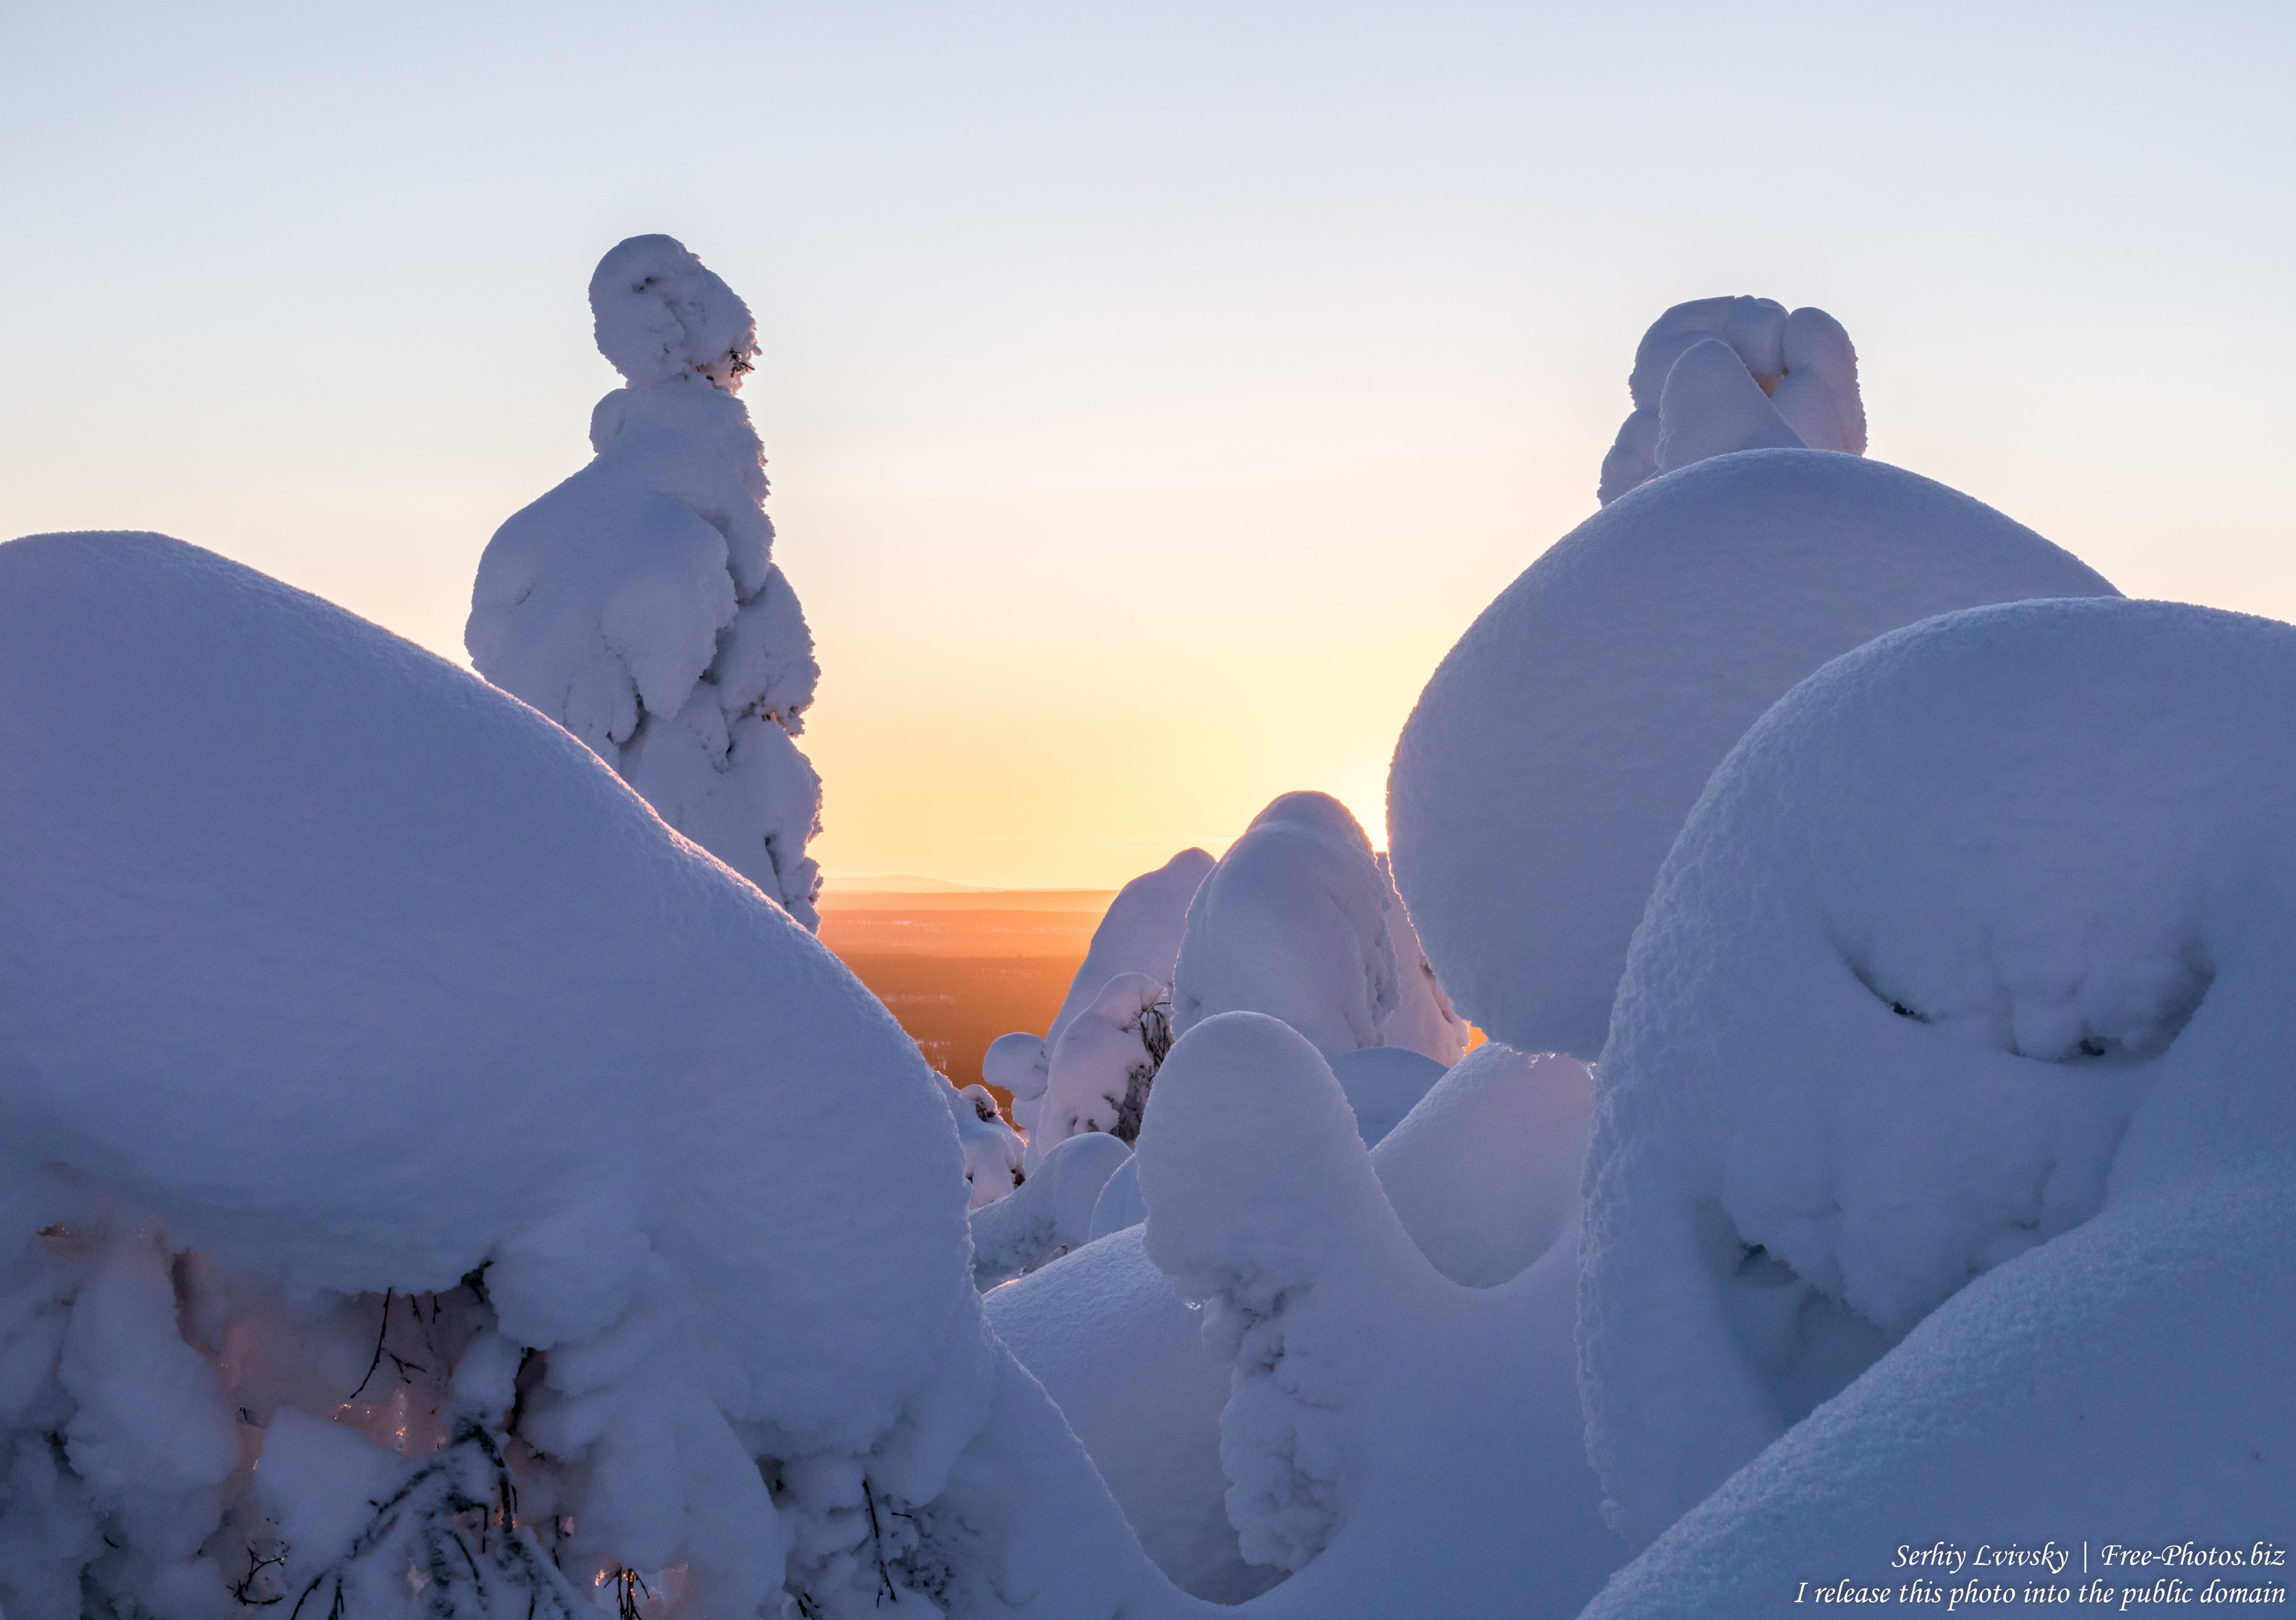 Valtavaara, Finland, photographed in January 2020 by Serhiy Lvivsky, picture 21